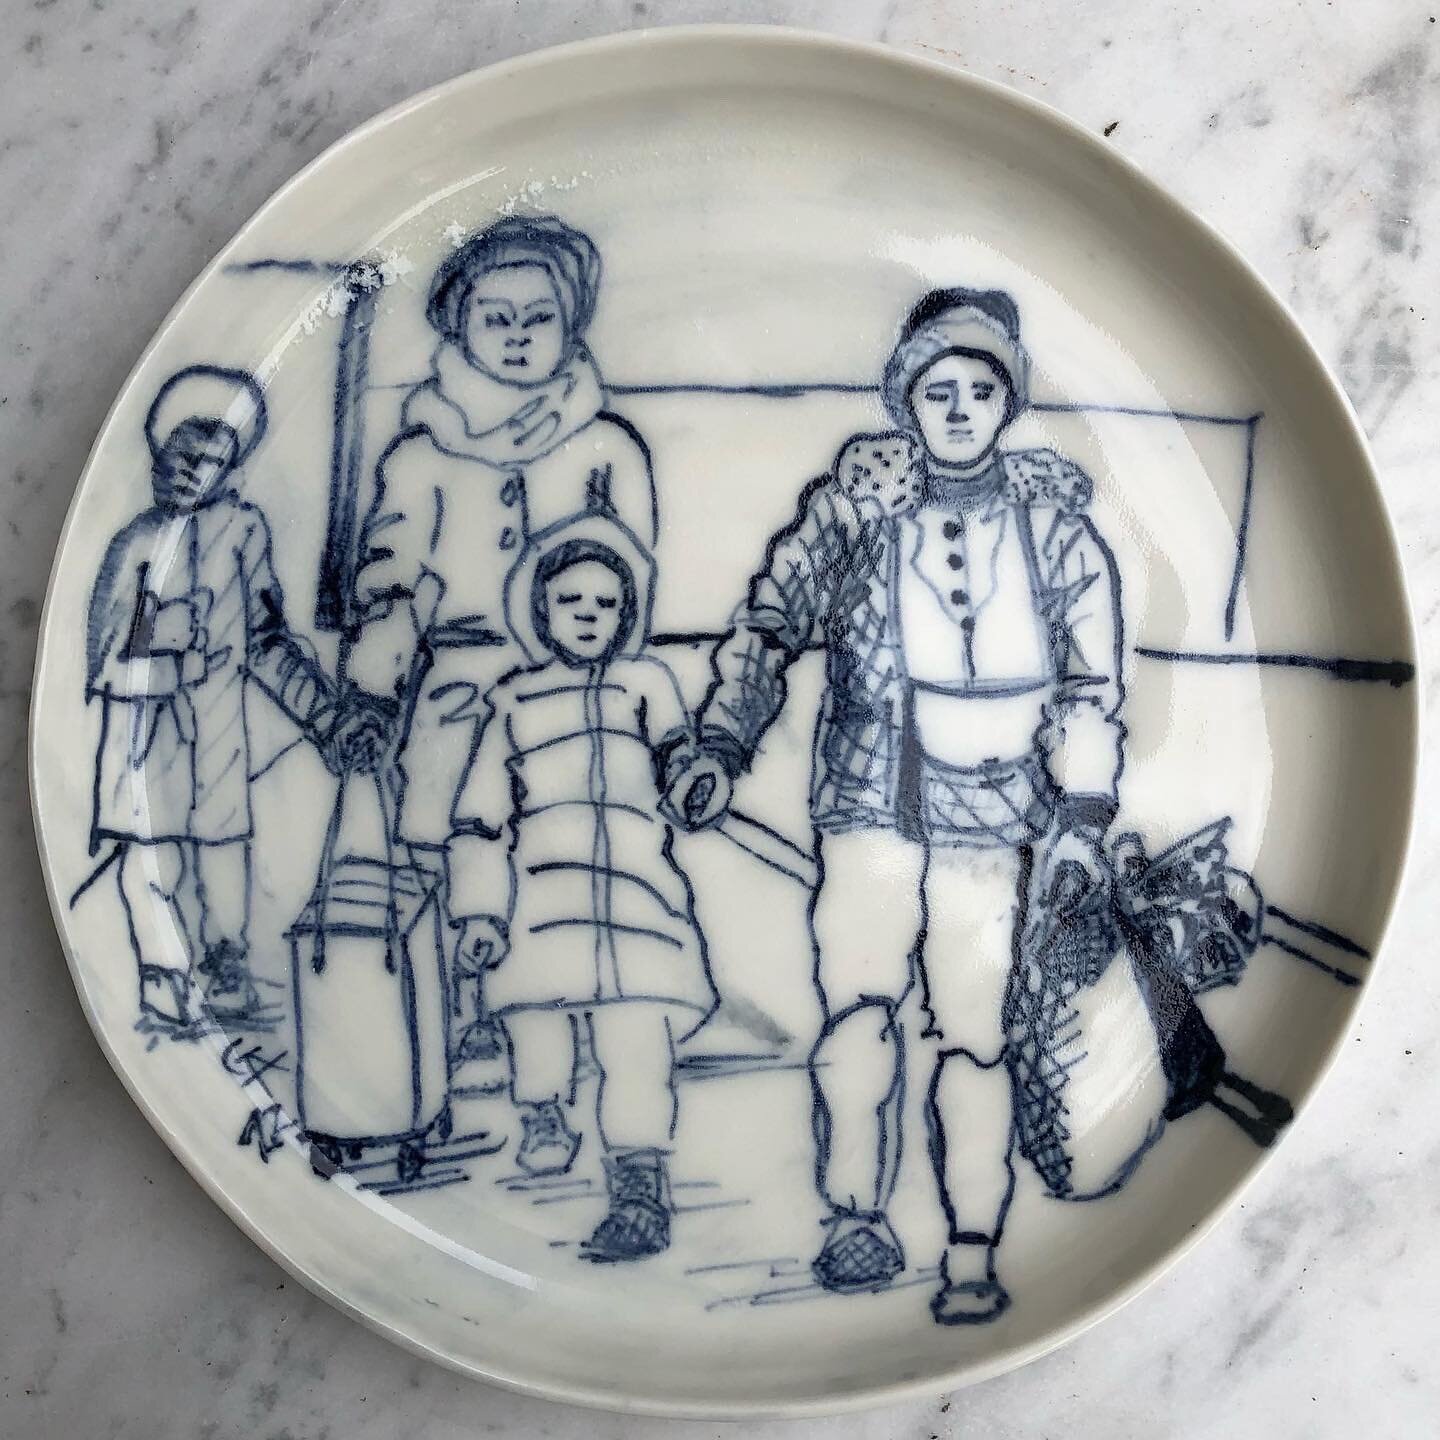 Installation for Wells Art Contemporary. Refugee porcelain plates will hopefully go on display in the Wells Cathedral library under glass in waist high display cabinets. The images of mothers clutching their children and a few essential belongings ma